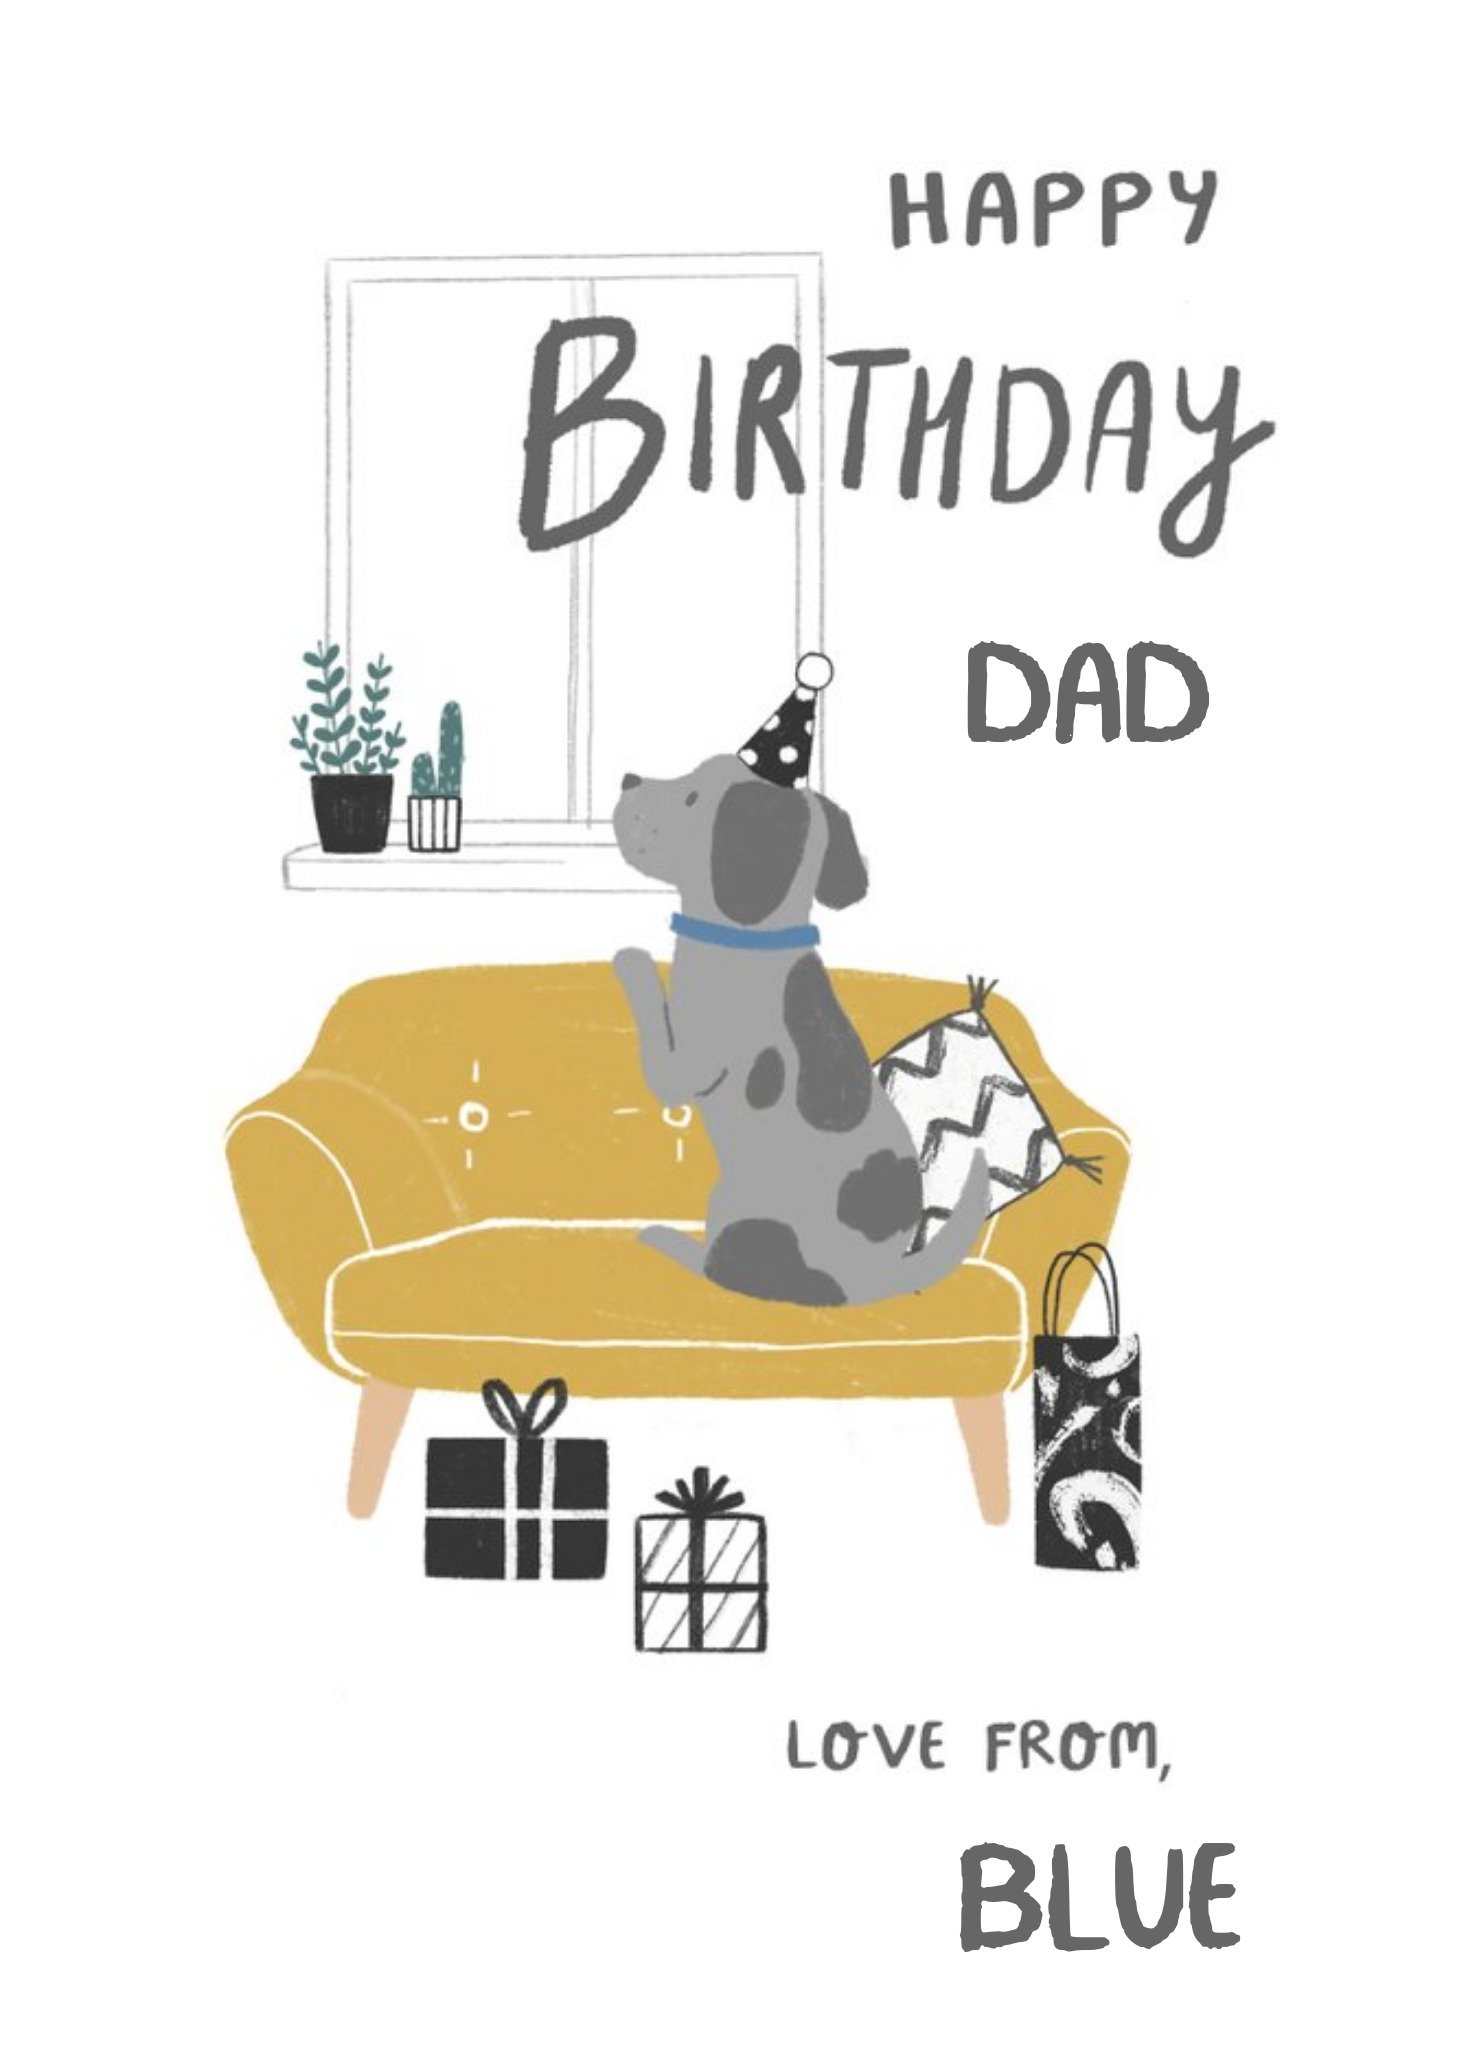 Other Millicent Venton Birthday Dad From Dog Pet Mustard Celebration Presents Male, Large Card